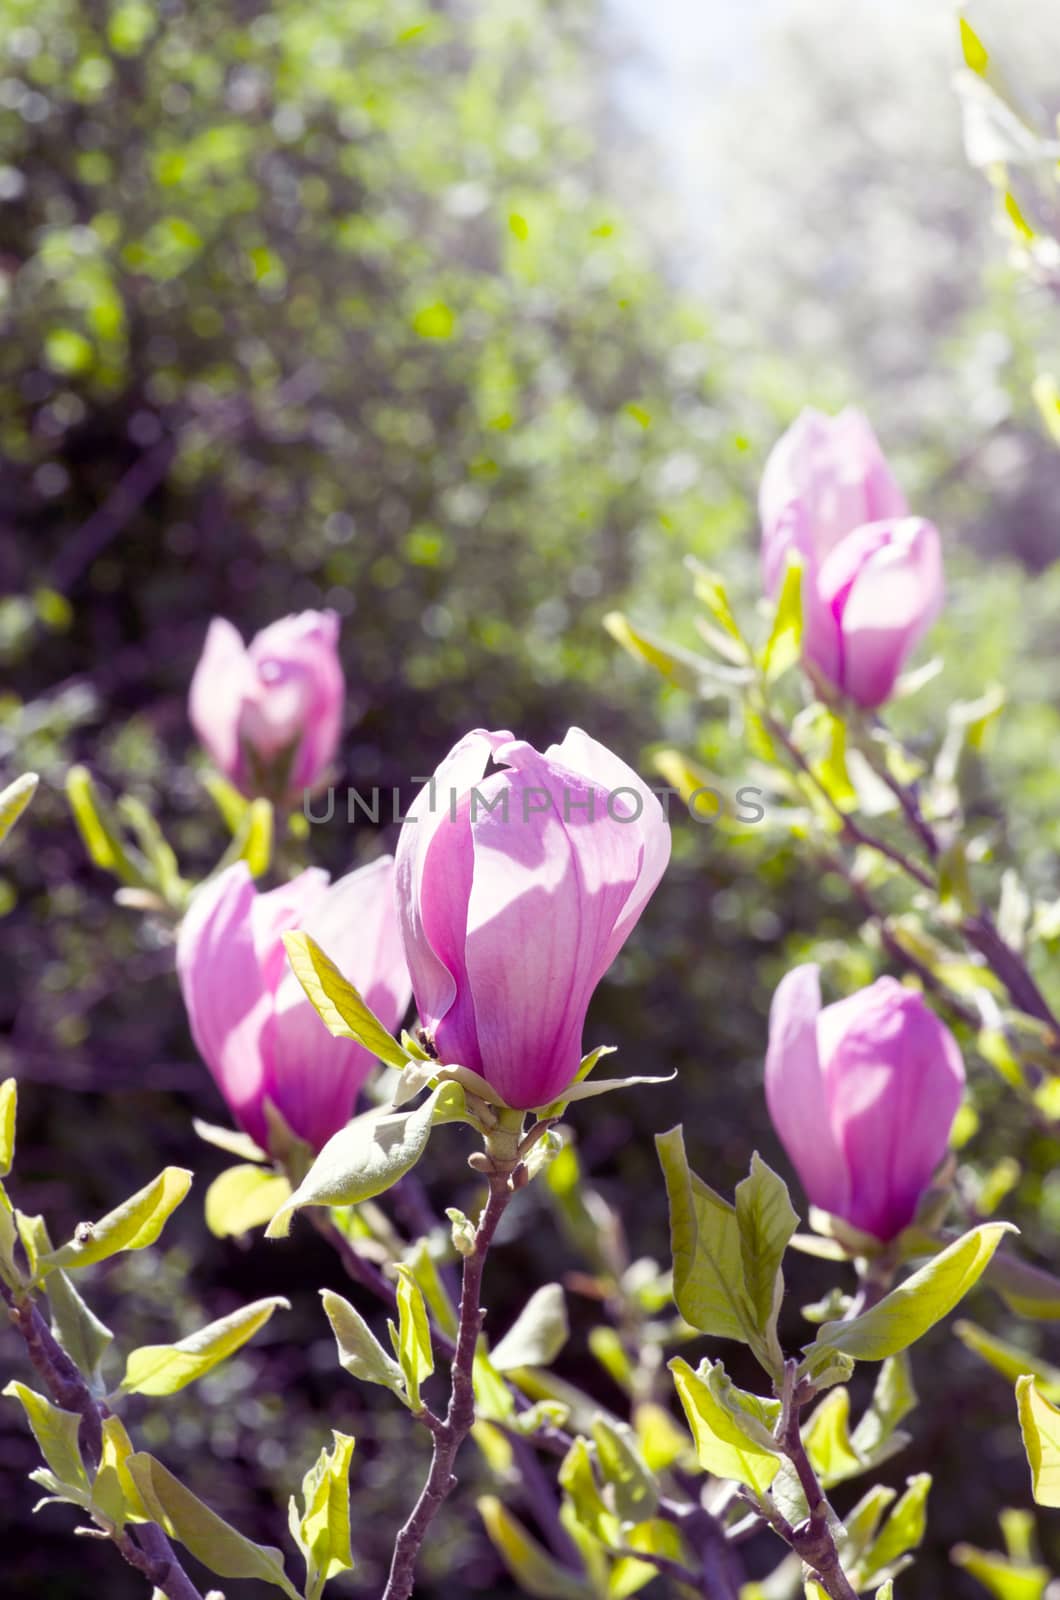 Beautiful Flowers of a Magnolia Tree. Soft focus by dolnikow